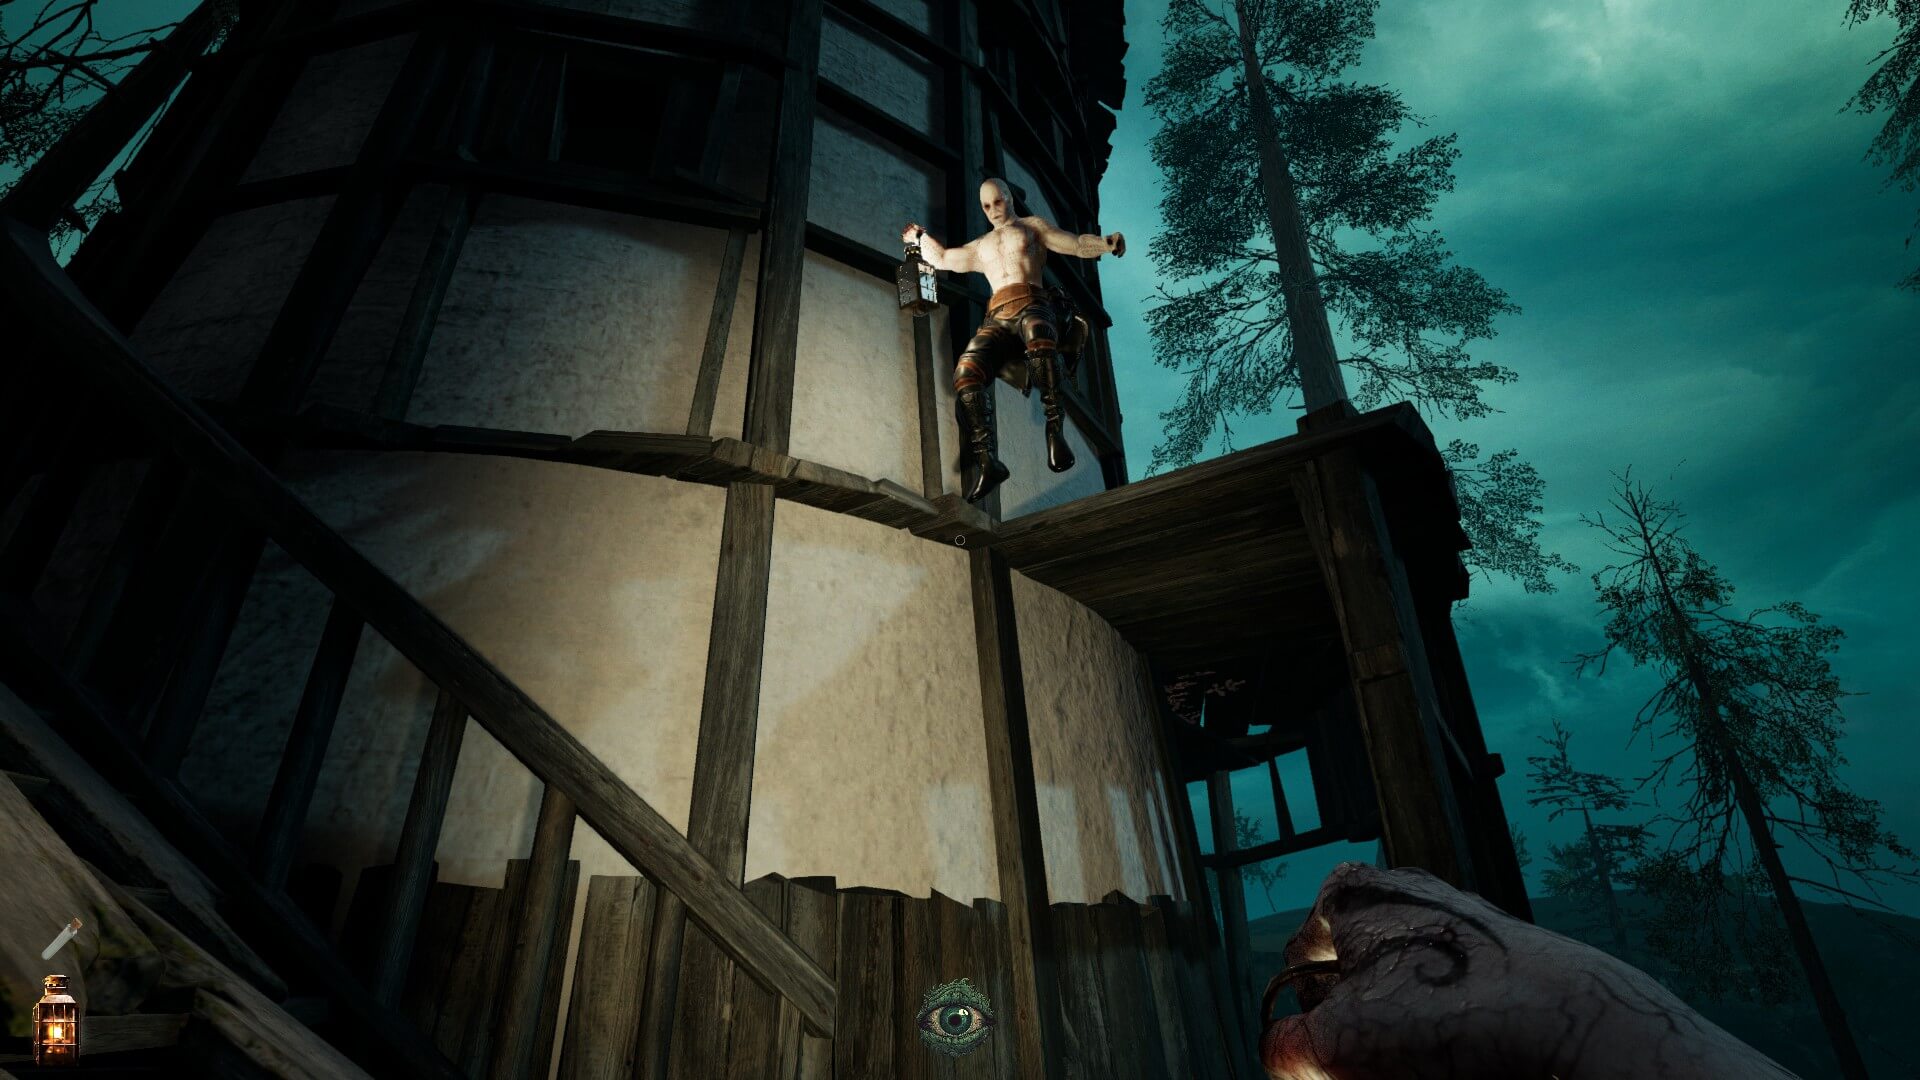 A pale character jumps from a platform that sits outside a tall building